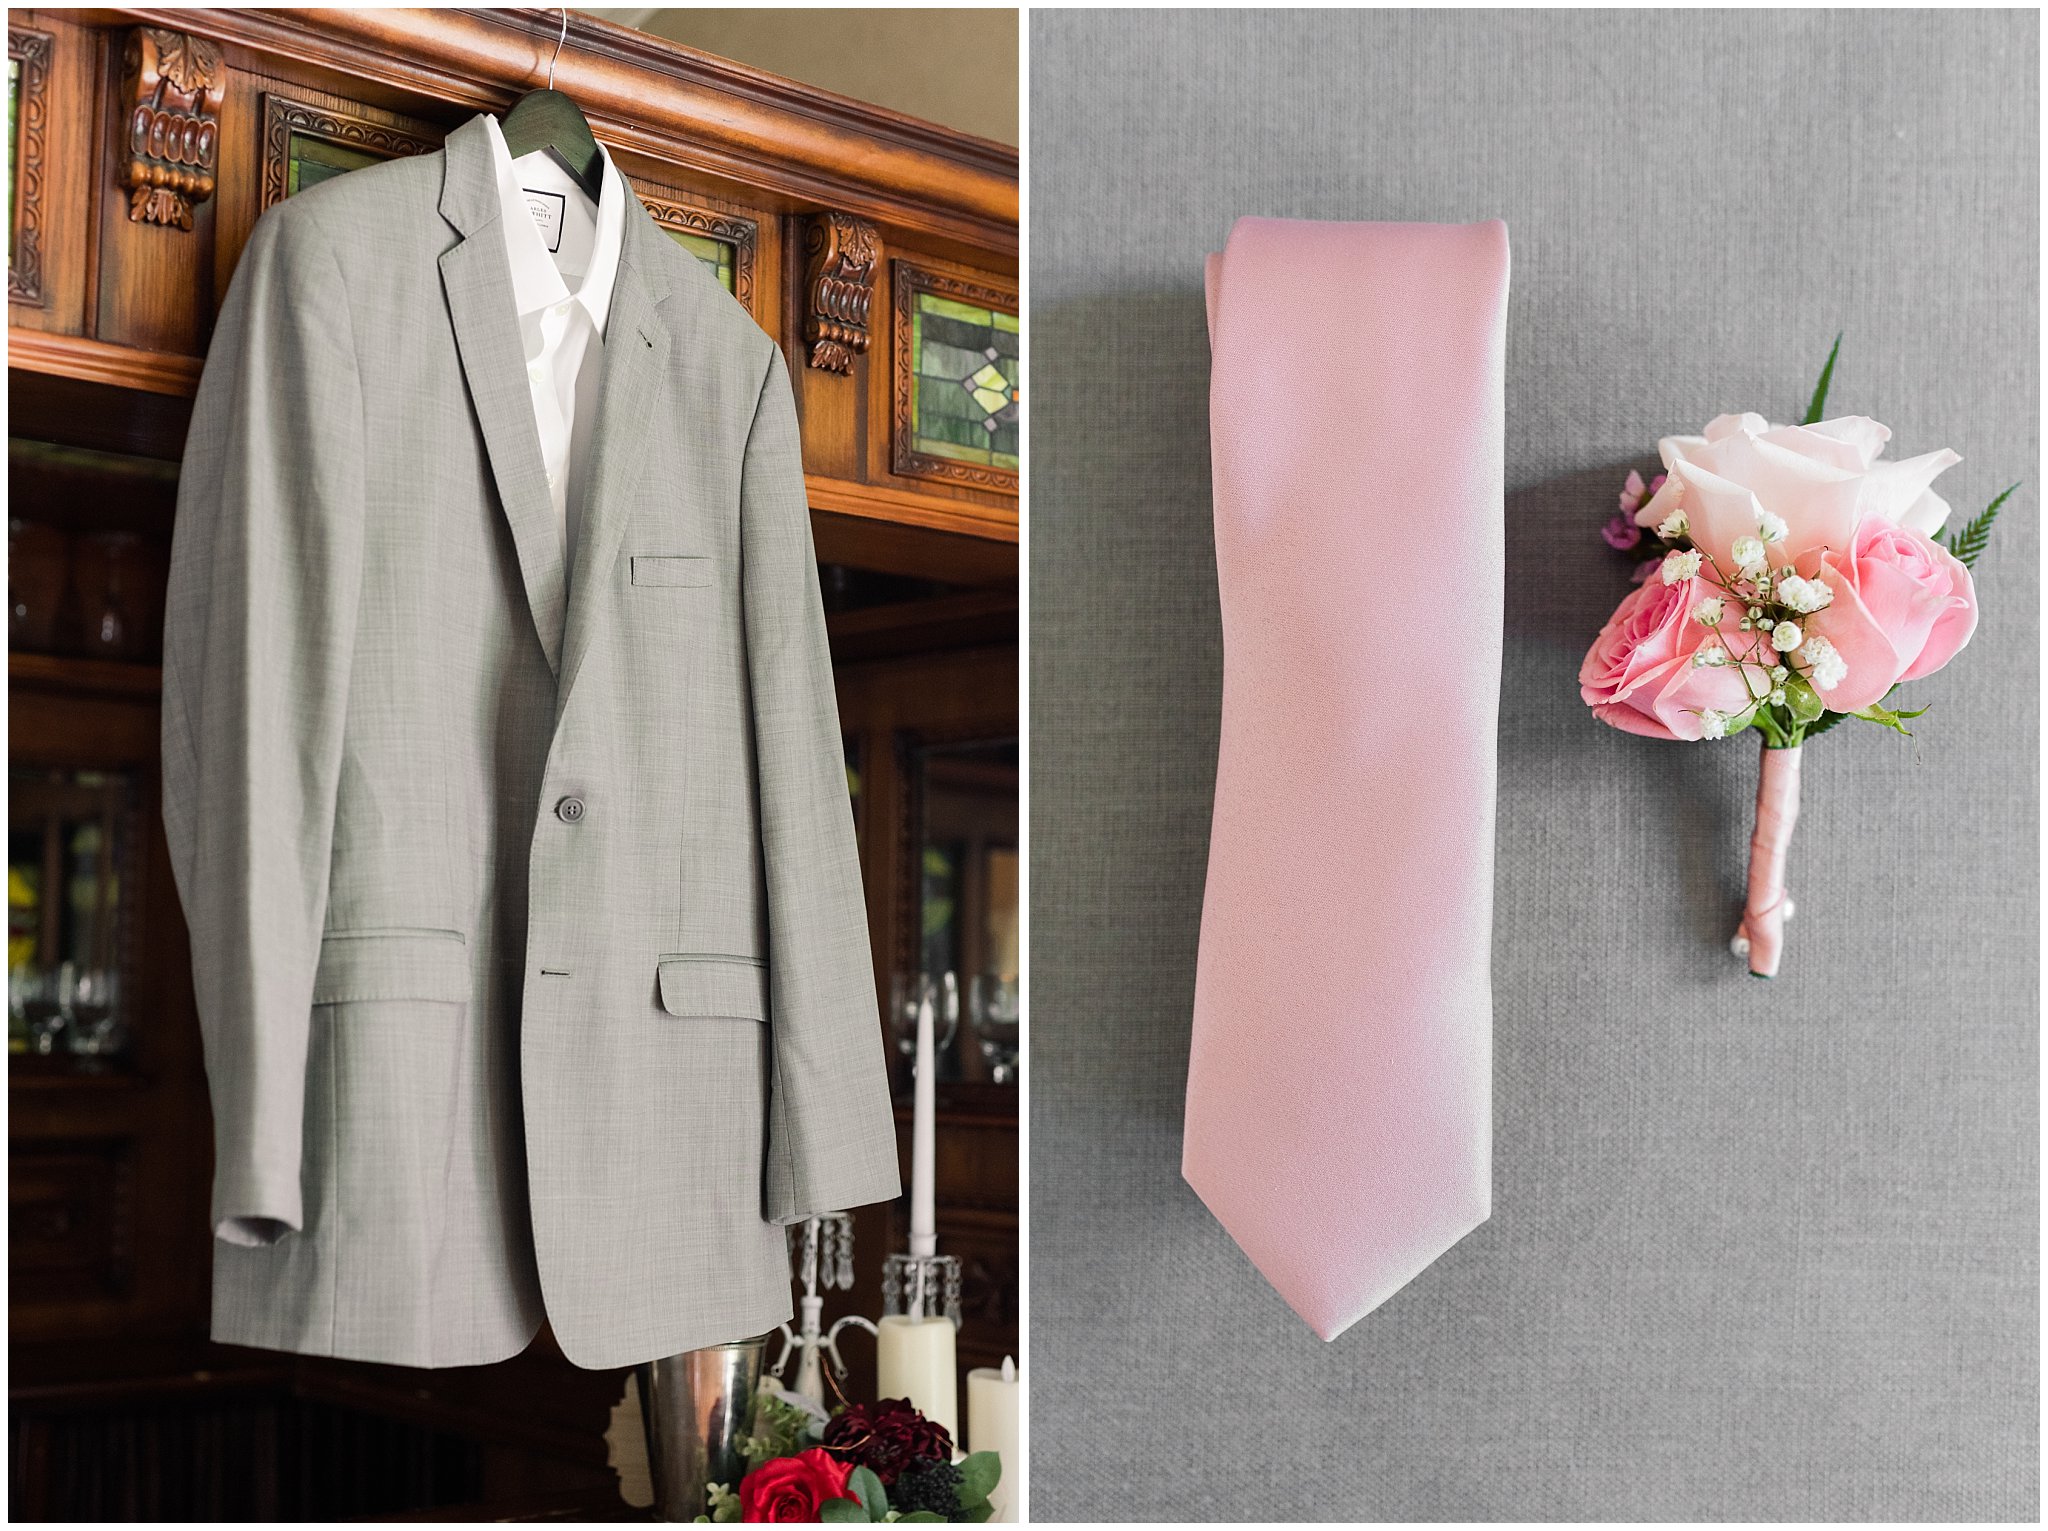 Grey suit hanging on vintage bar, blush tie and boutonniere | Oak Hills Utah Dusty Rose and Gray Summer Wedding | Jessie and Dallin Photography